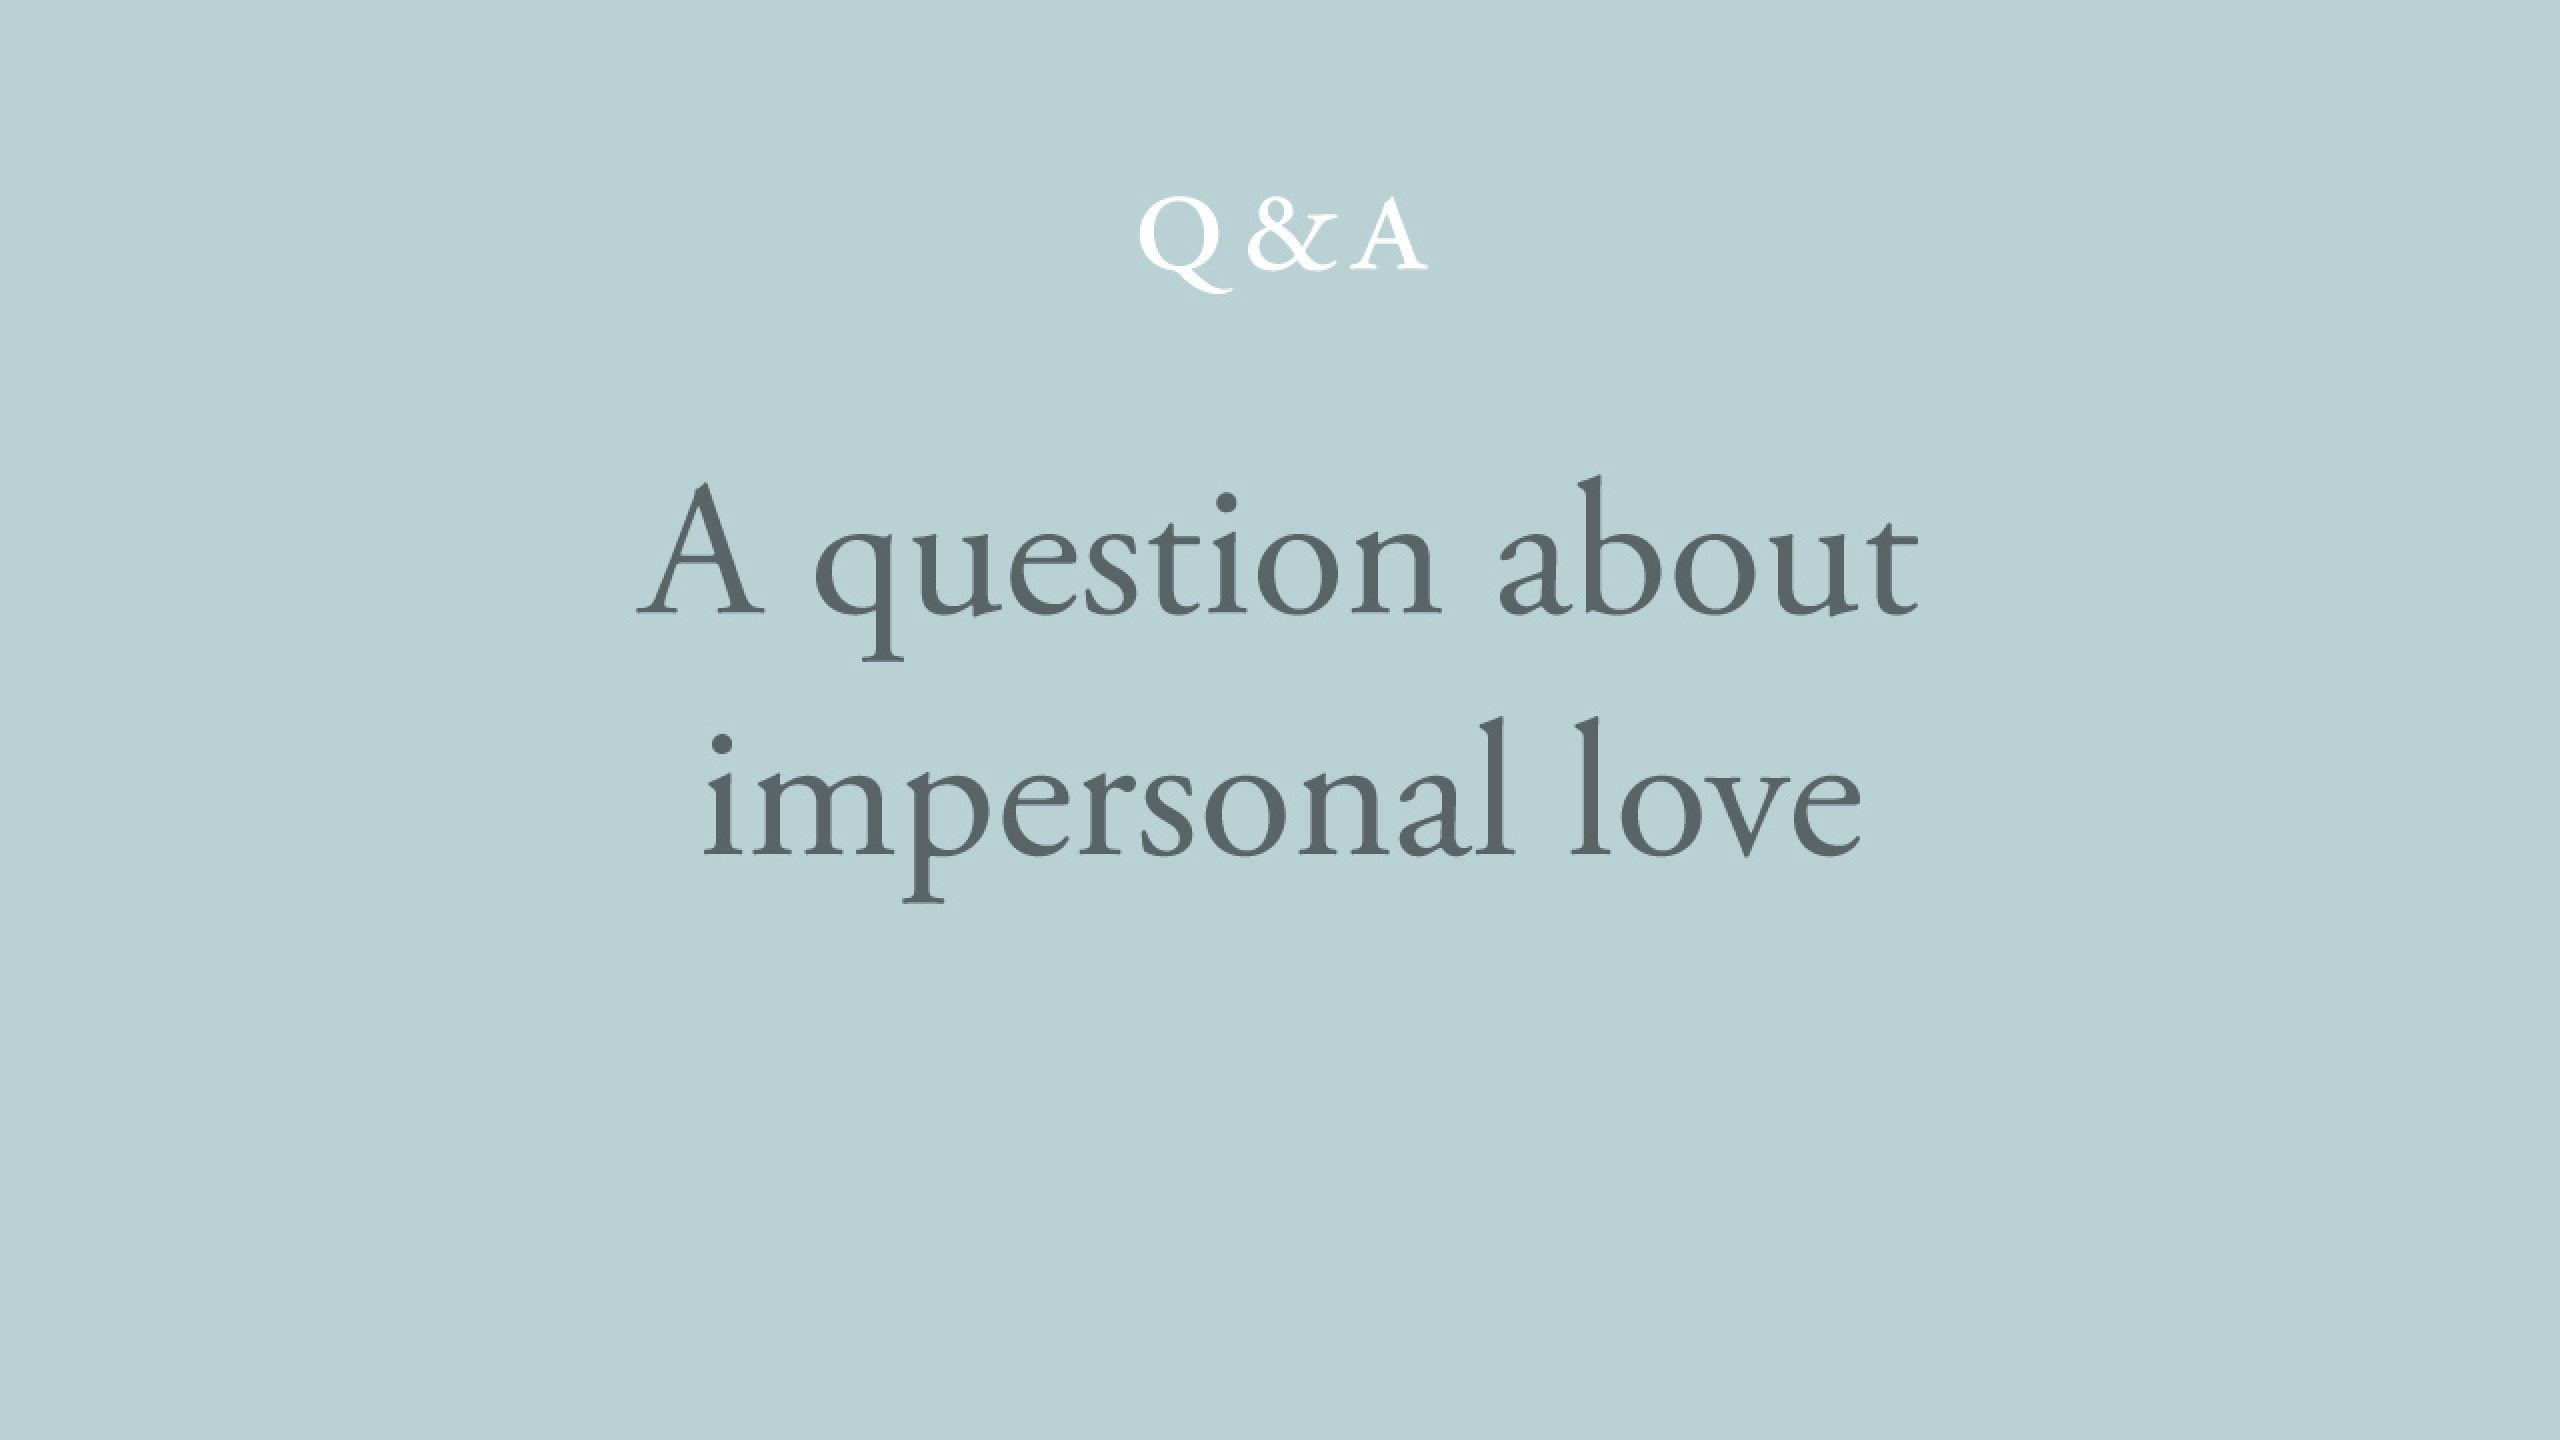 How do we know that love is impersonal?